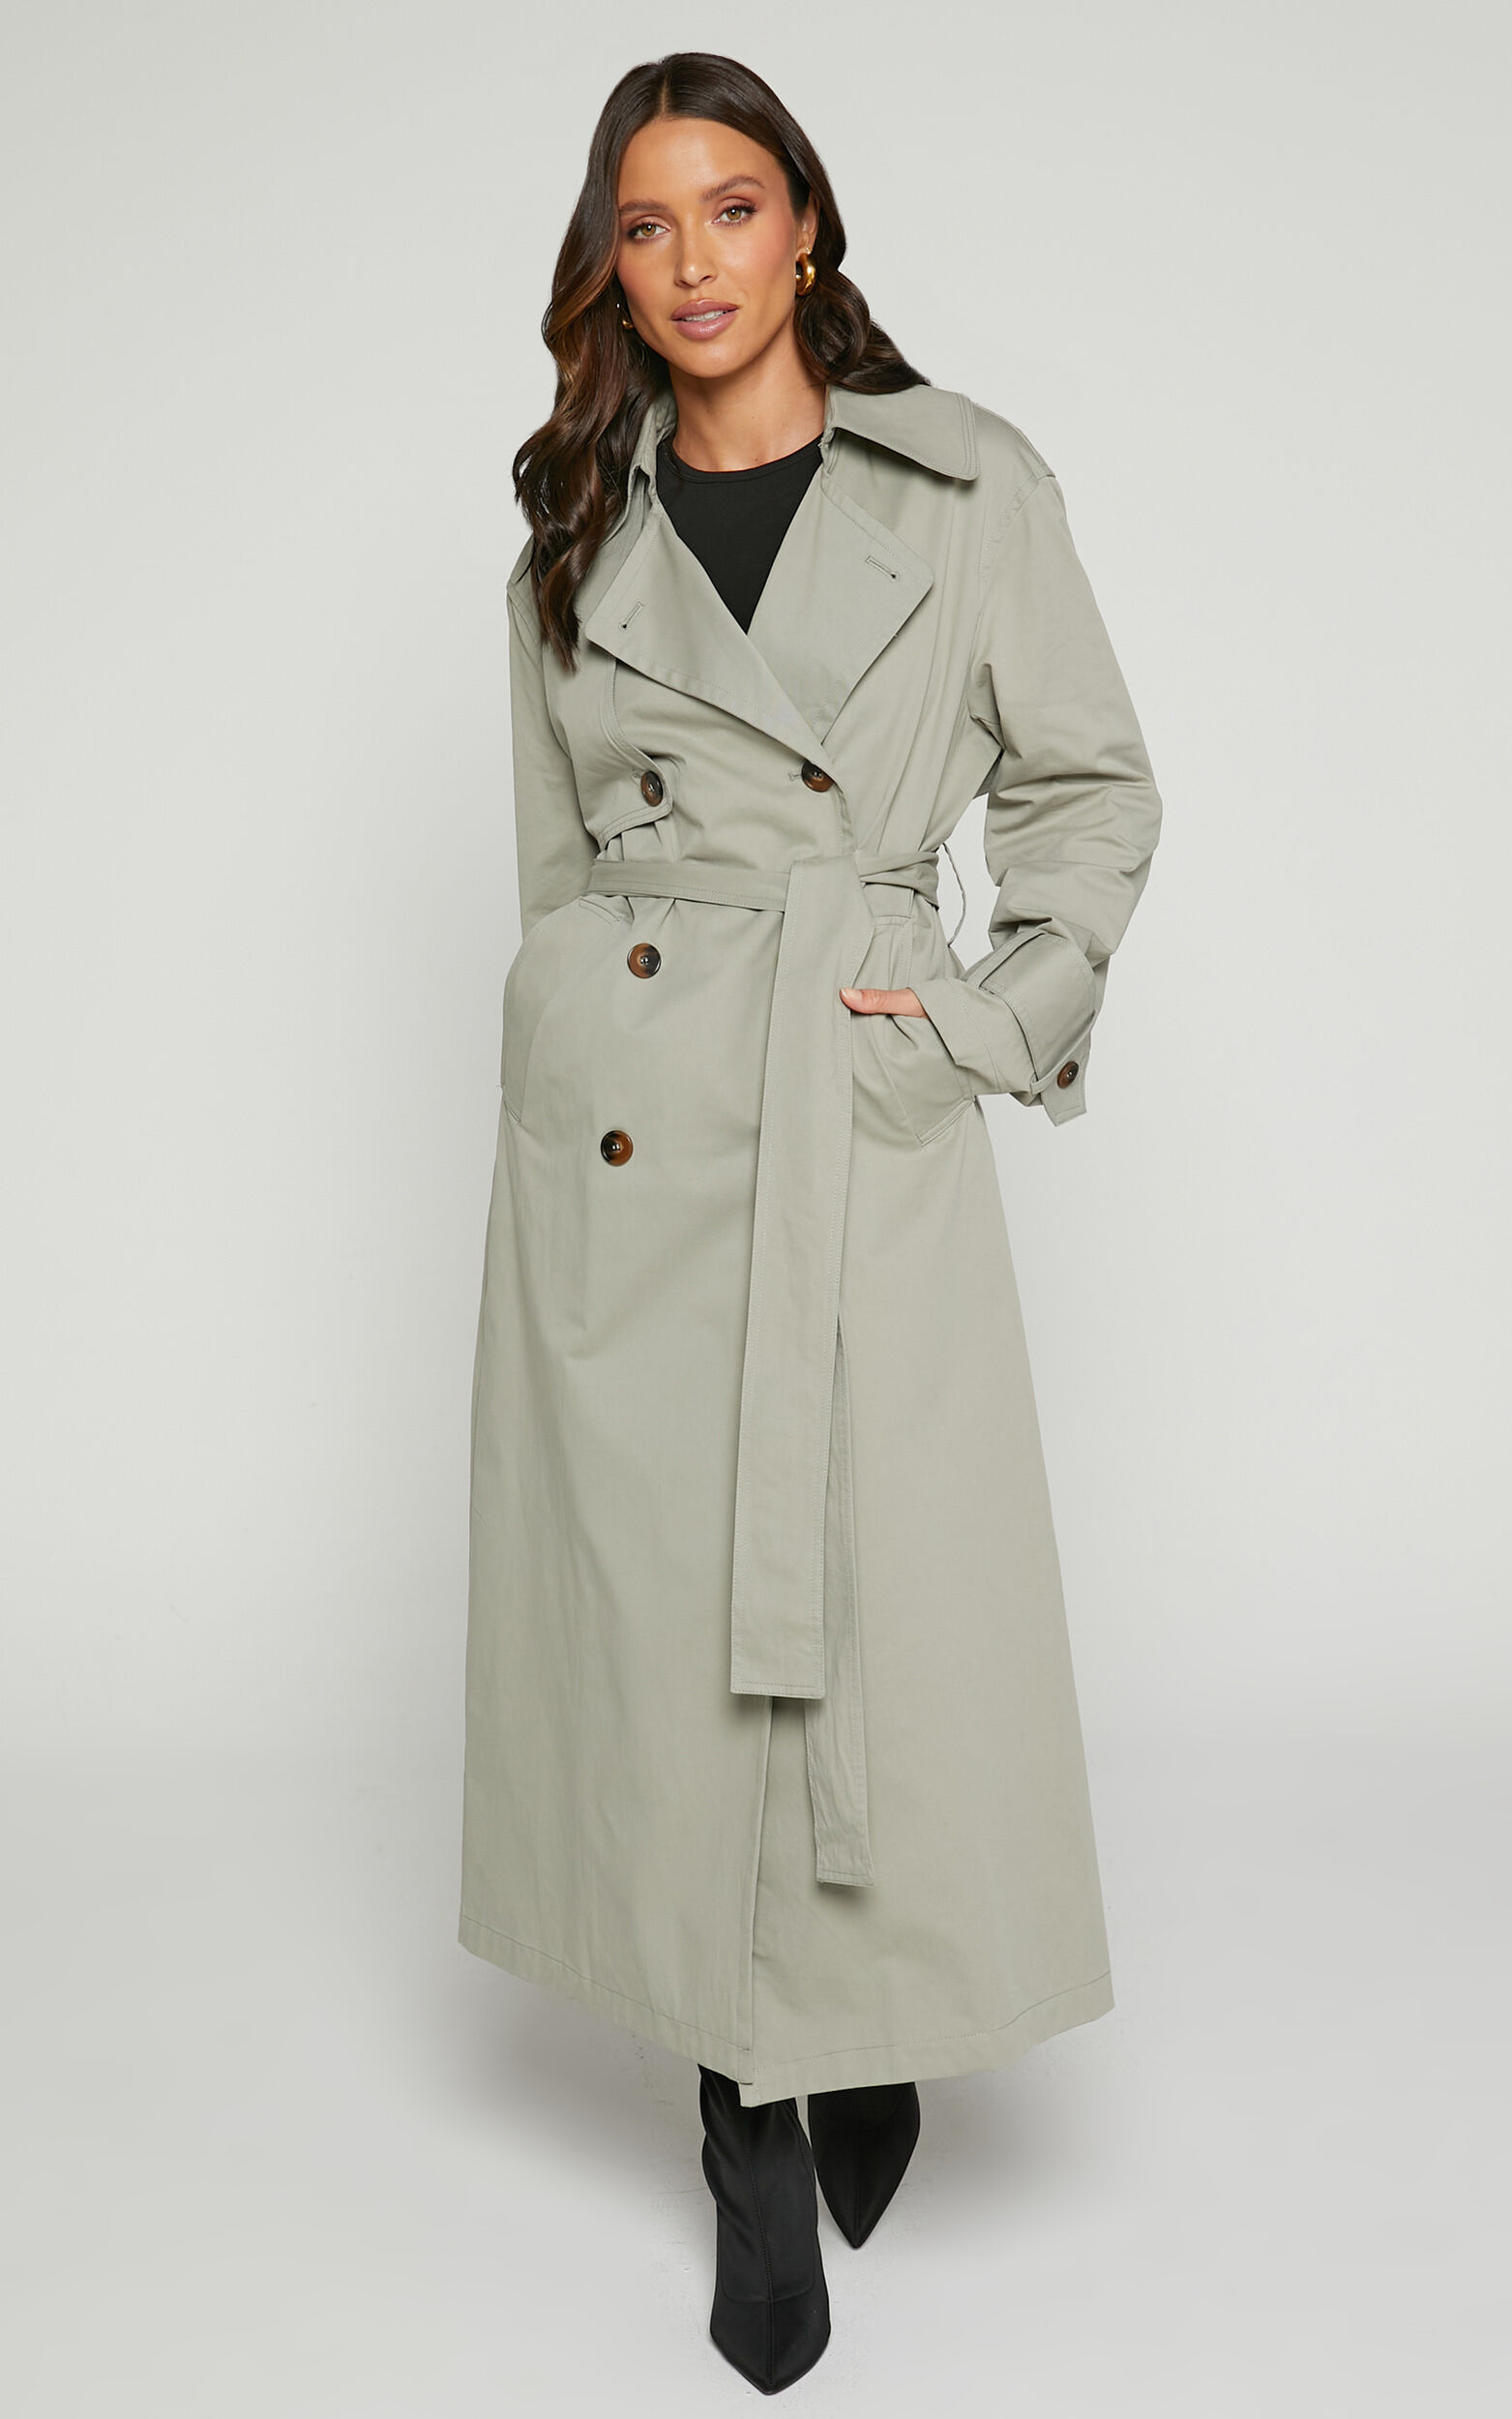 Avah Trench Coat - Double Breasted Tie Waist Coat in Washed Khaki - 04, GRN1